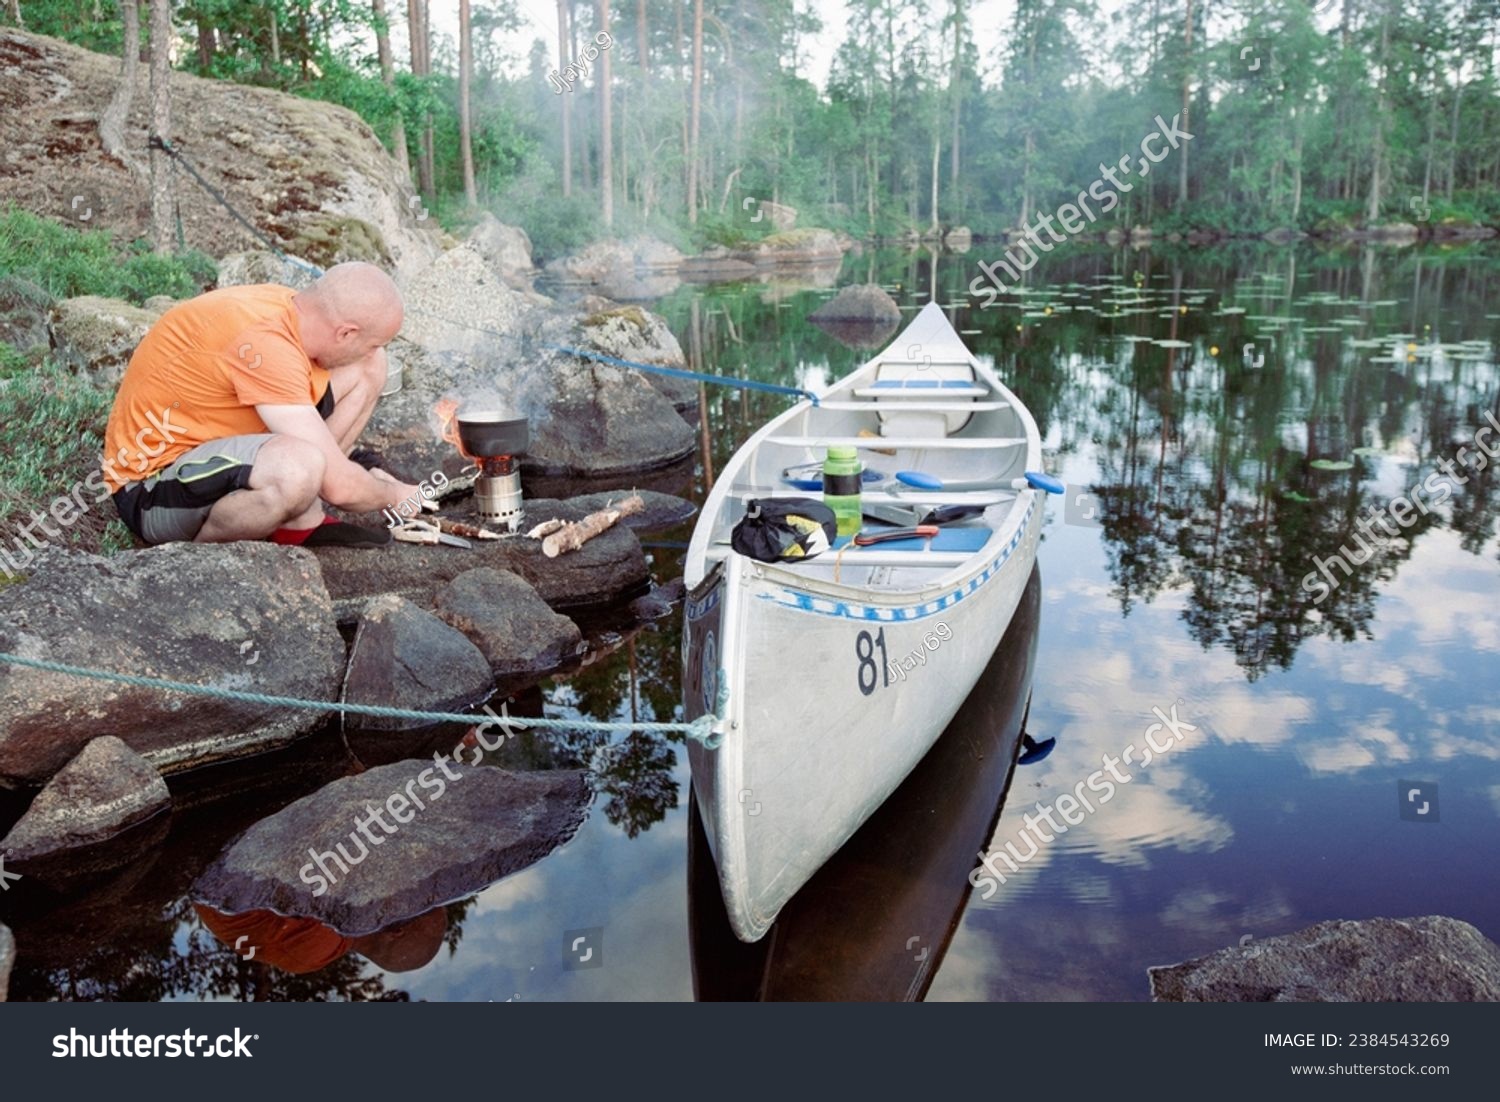 A man prepares breakfast on a small camping stove next to a metal canoe by a lake in Sweden #2384543269